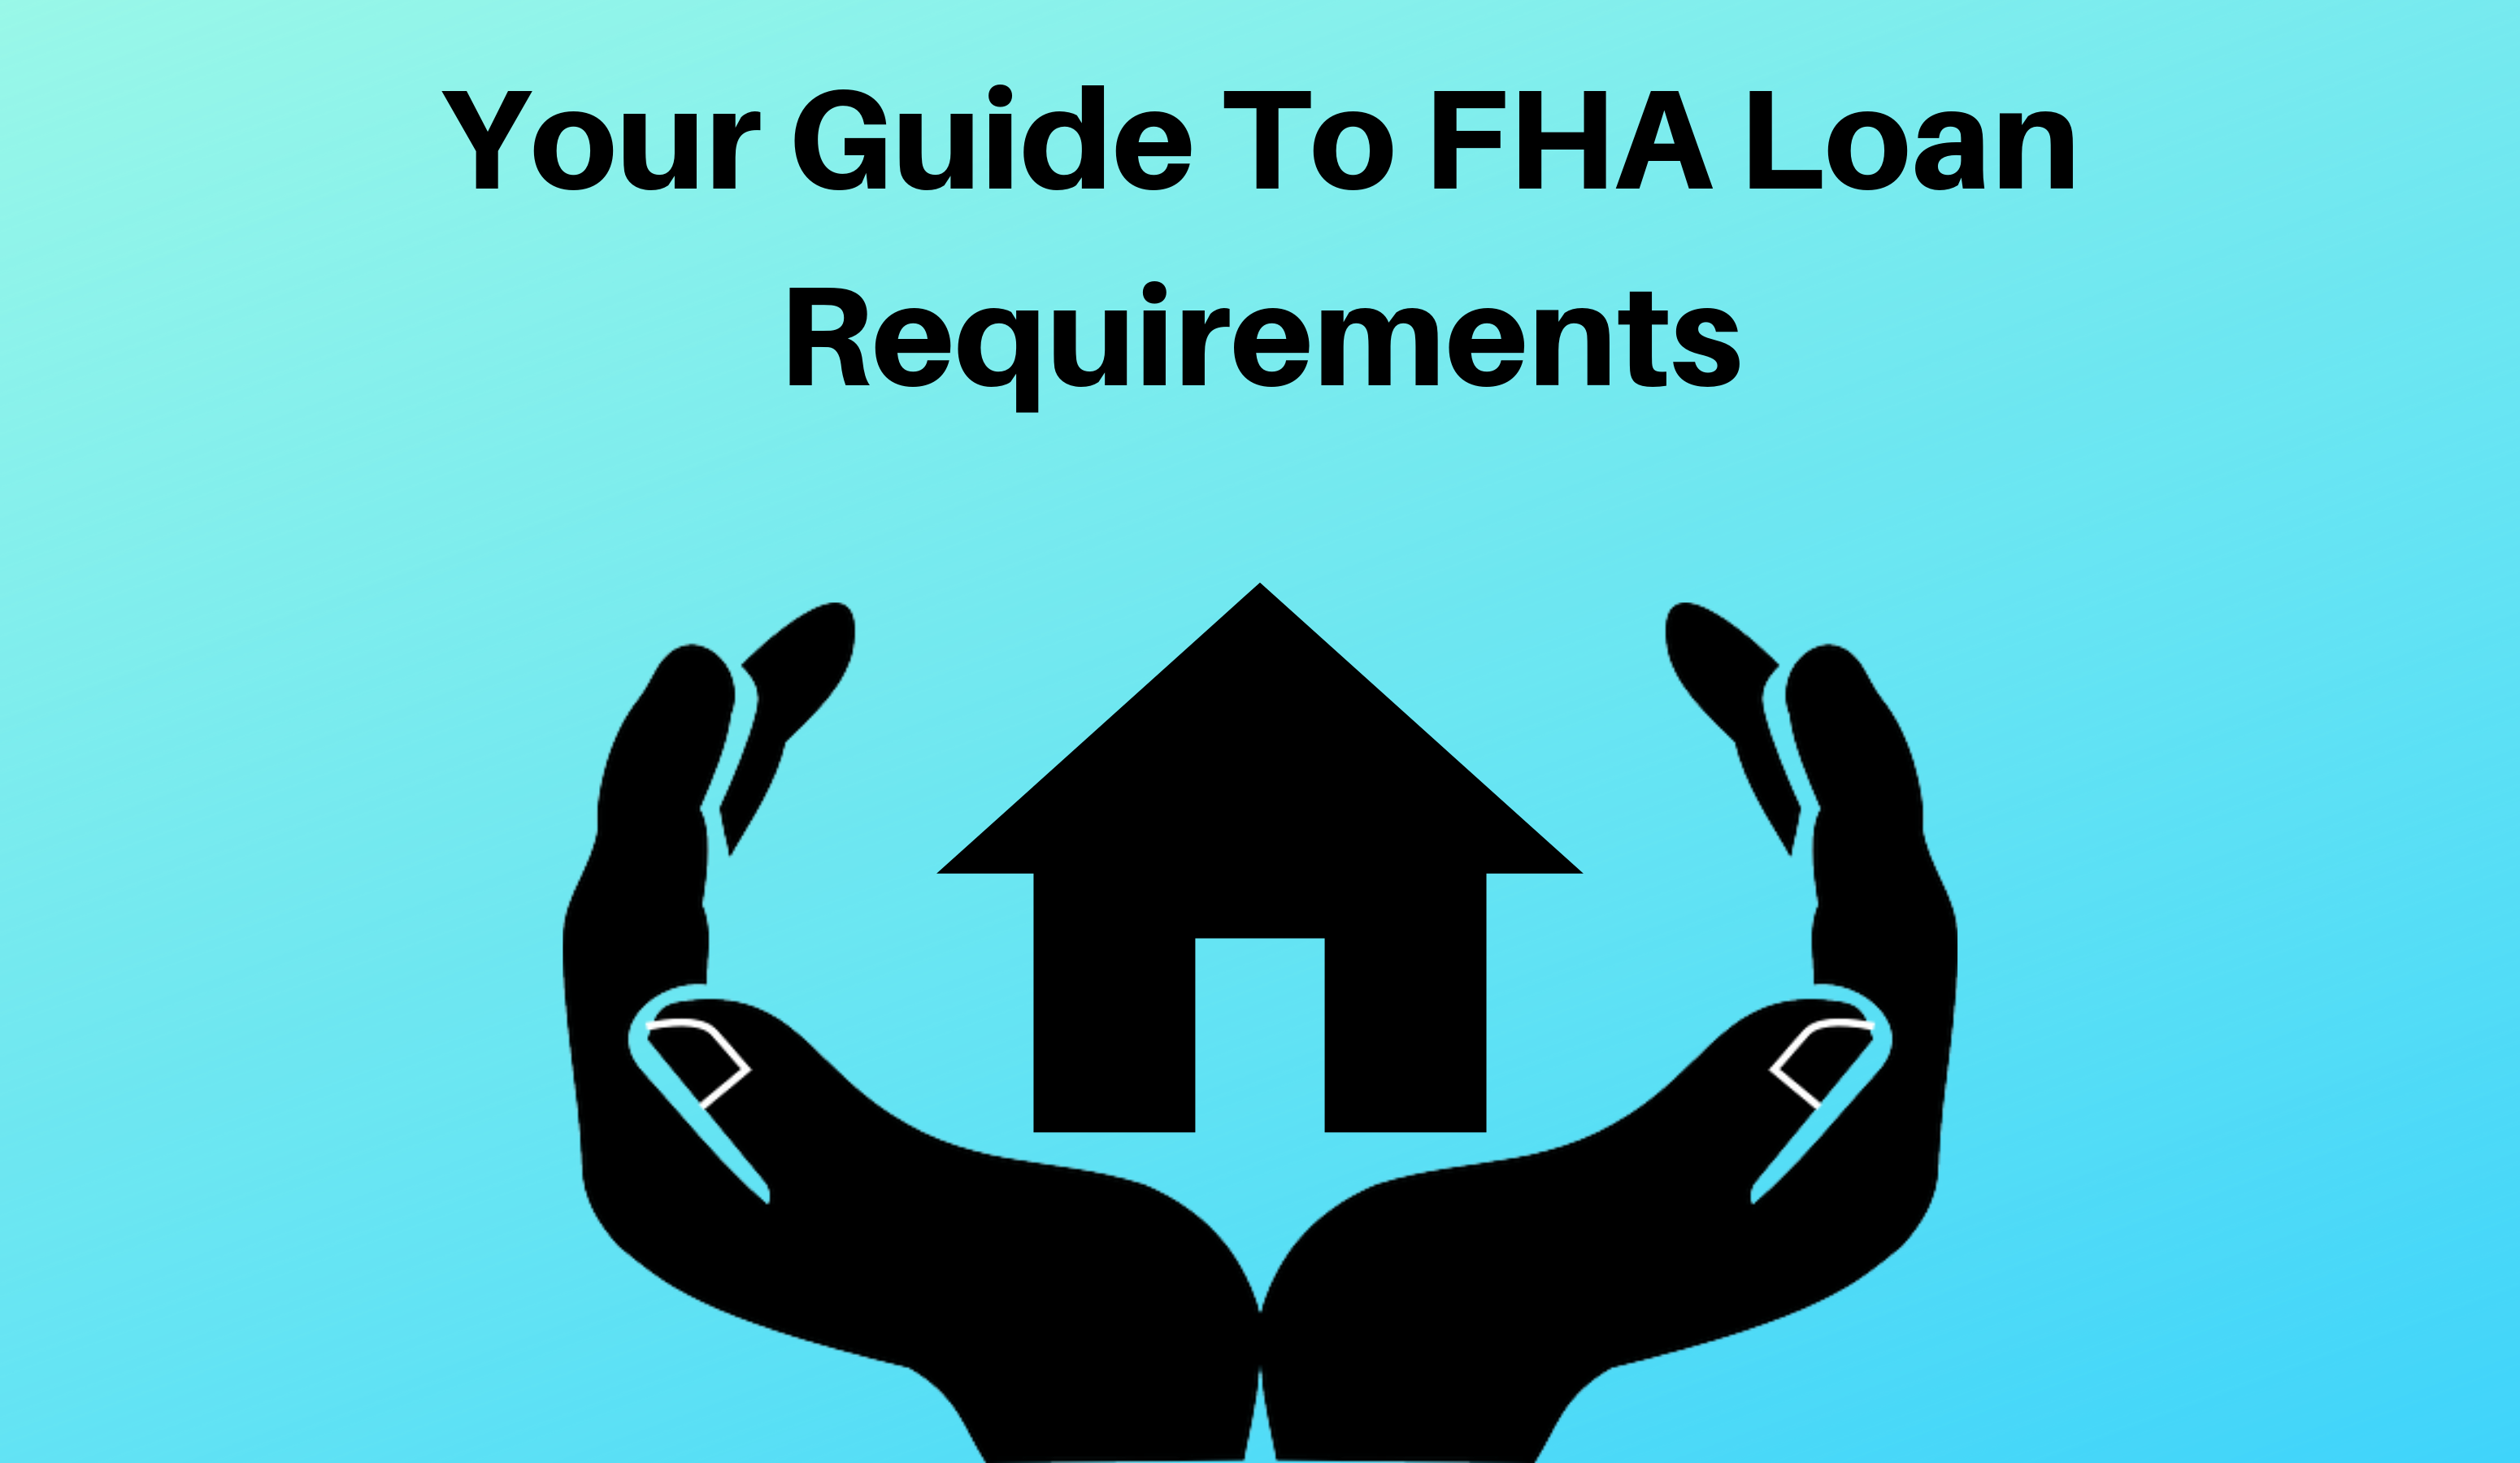 What is the minimum credit score for an FHA loan?